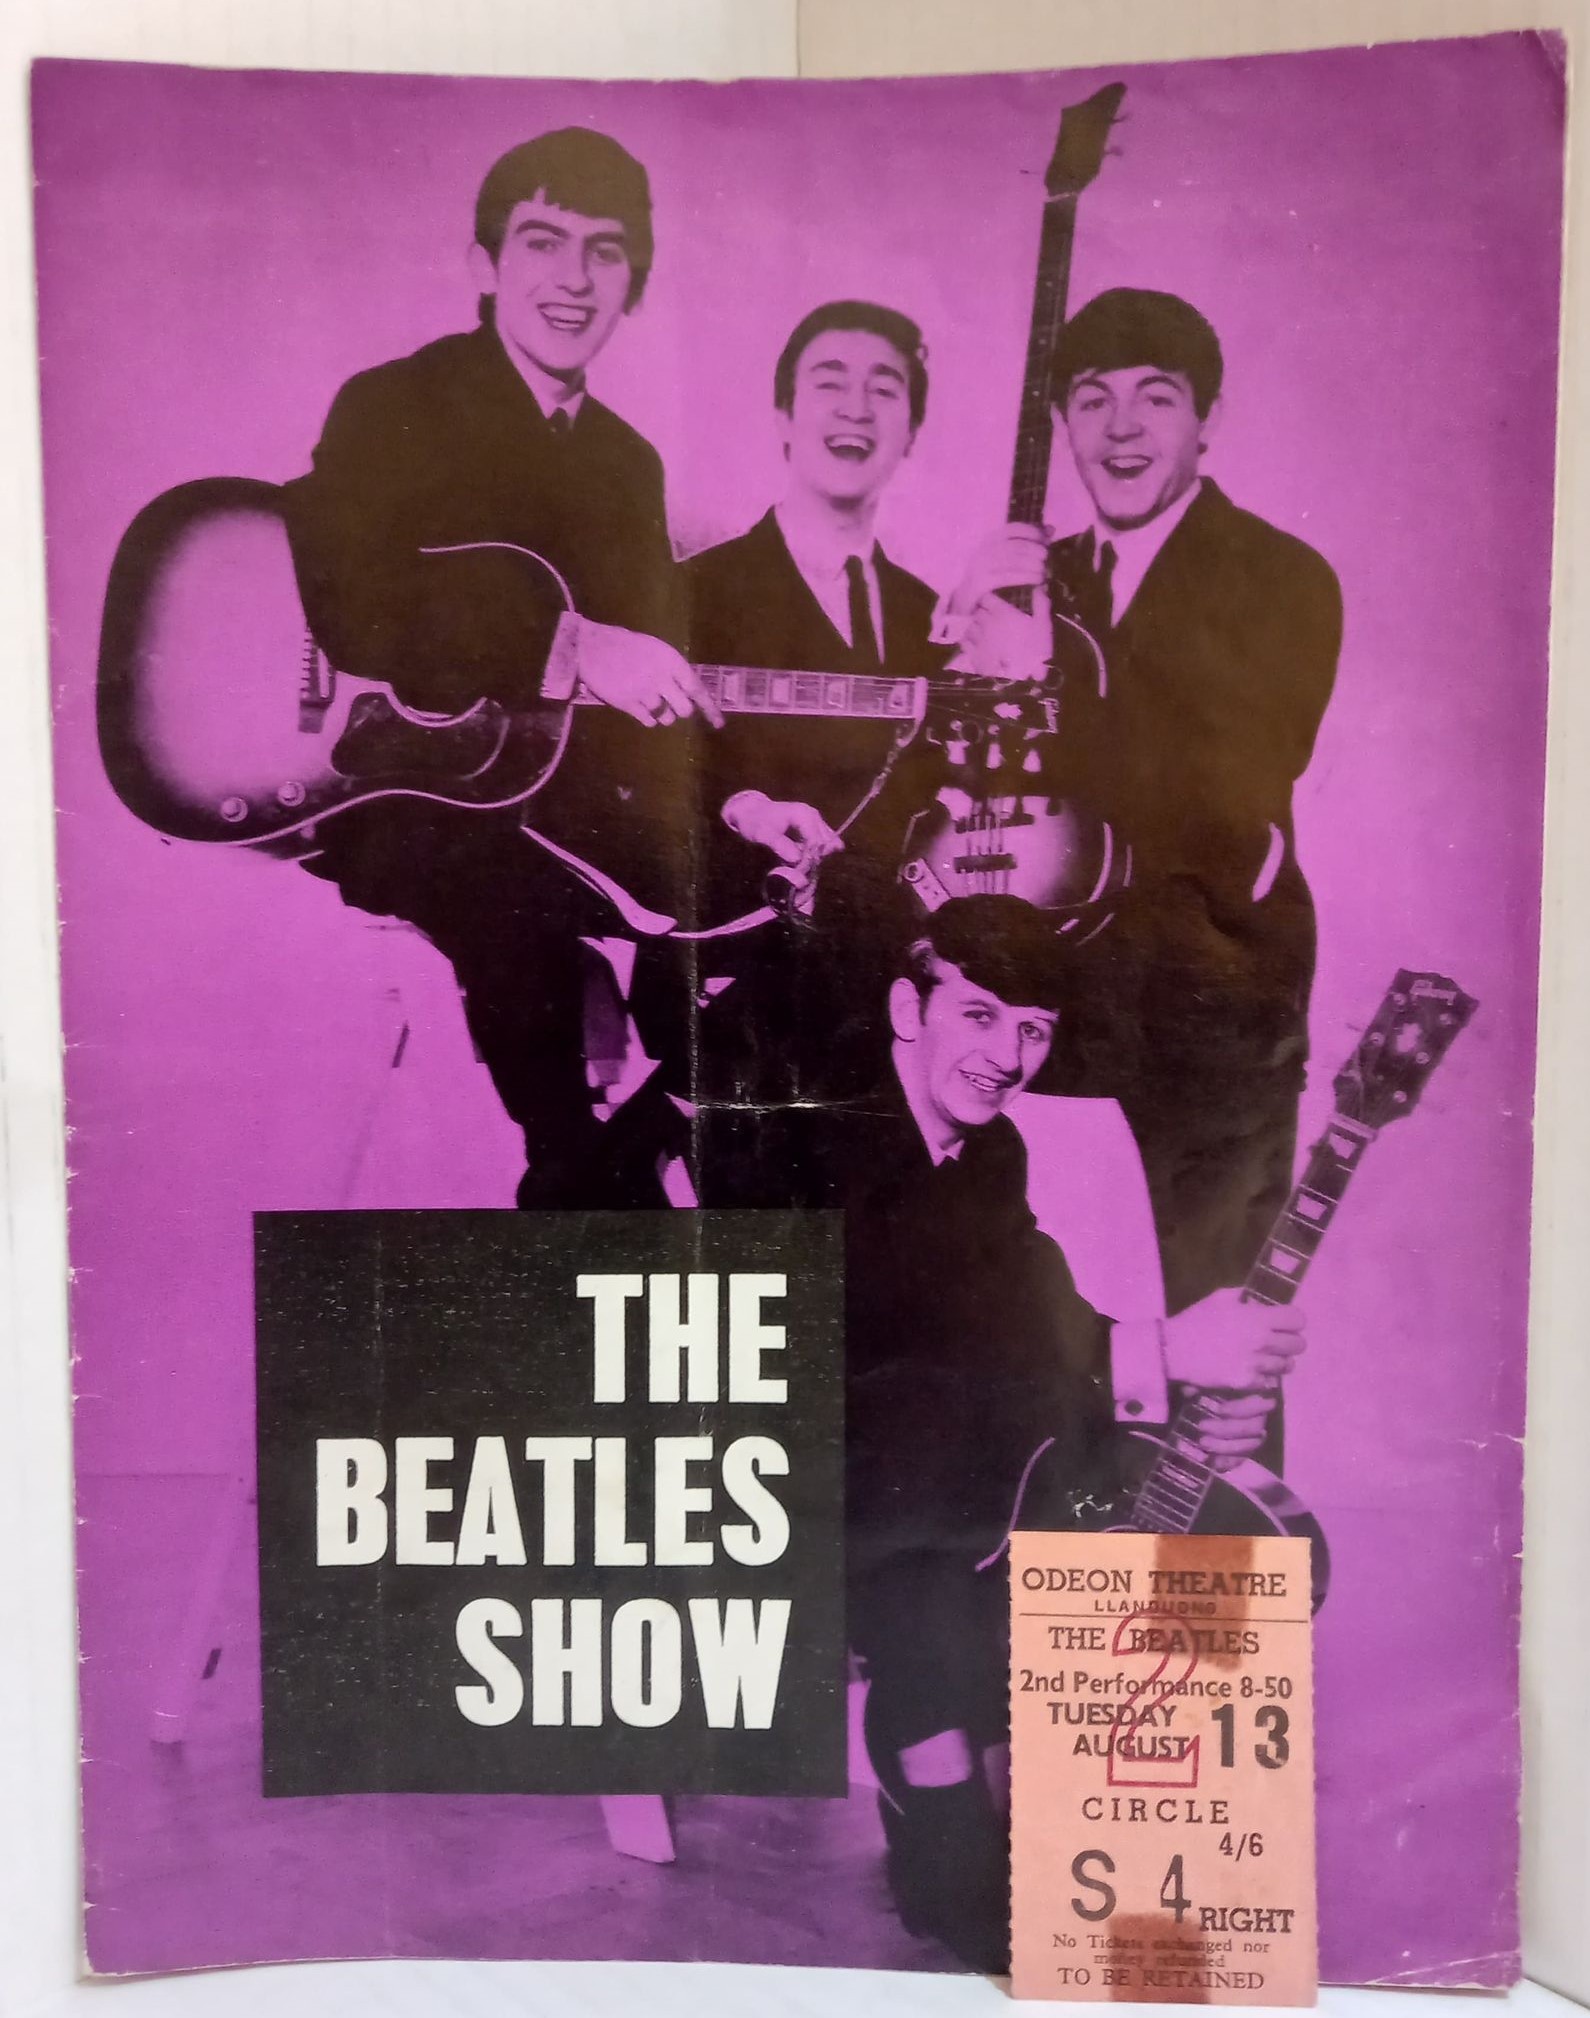 The Beatles Show Programme for Llandudno Odeon Theatre with ticket stub dated 13th August 1963 (2)